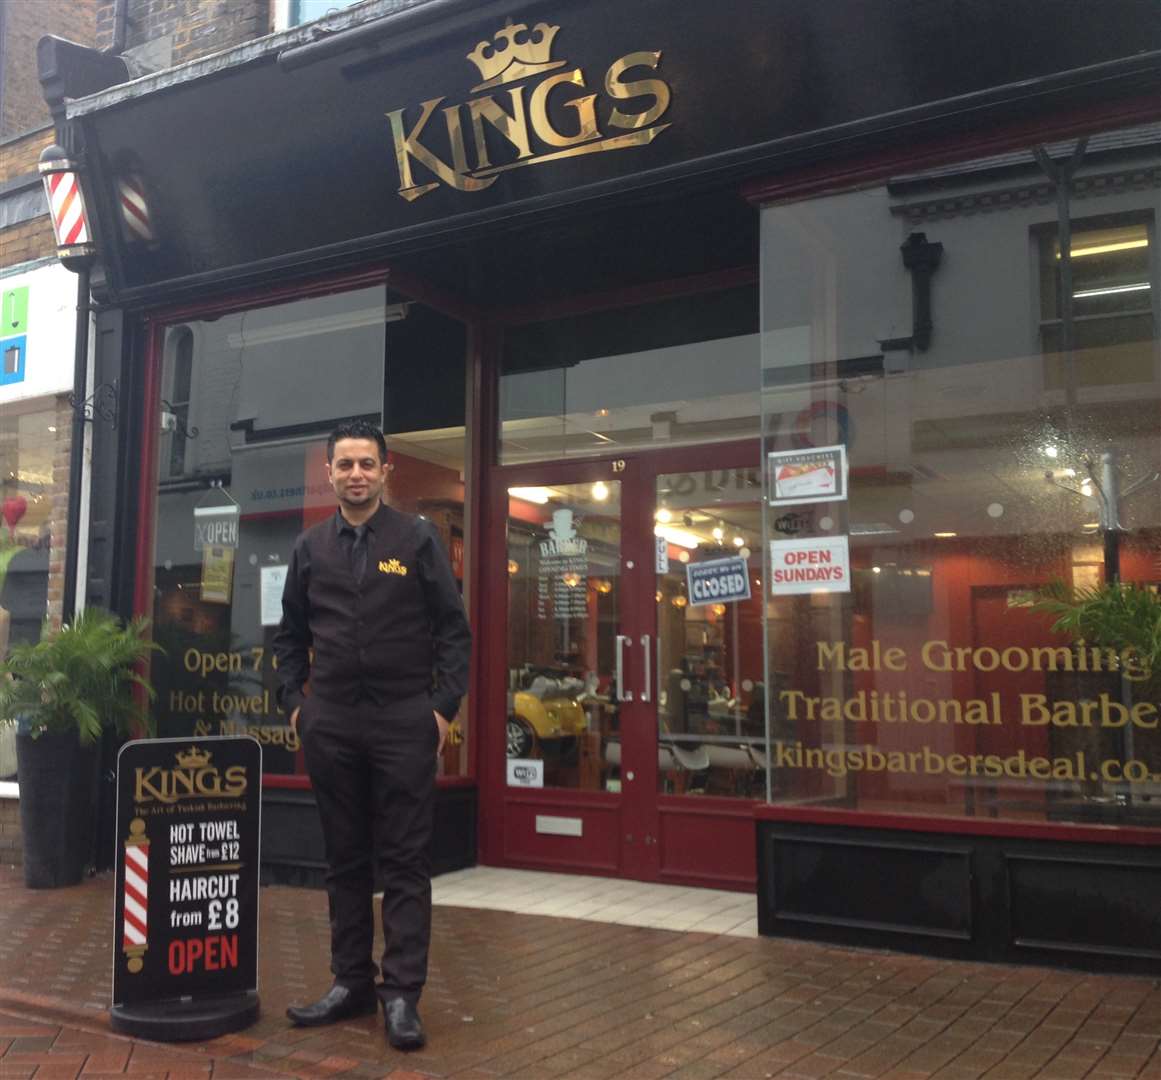 Enver (Efe) at King's barbers in High Street has been recognised for his wet shave skills